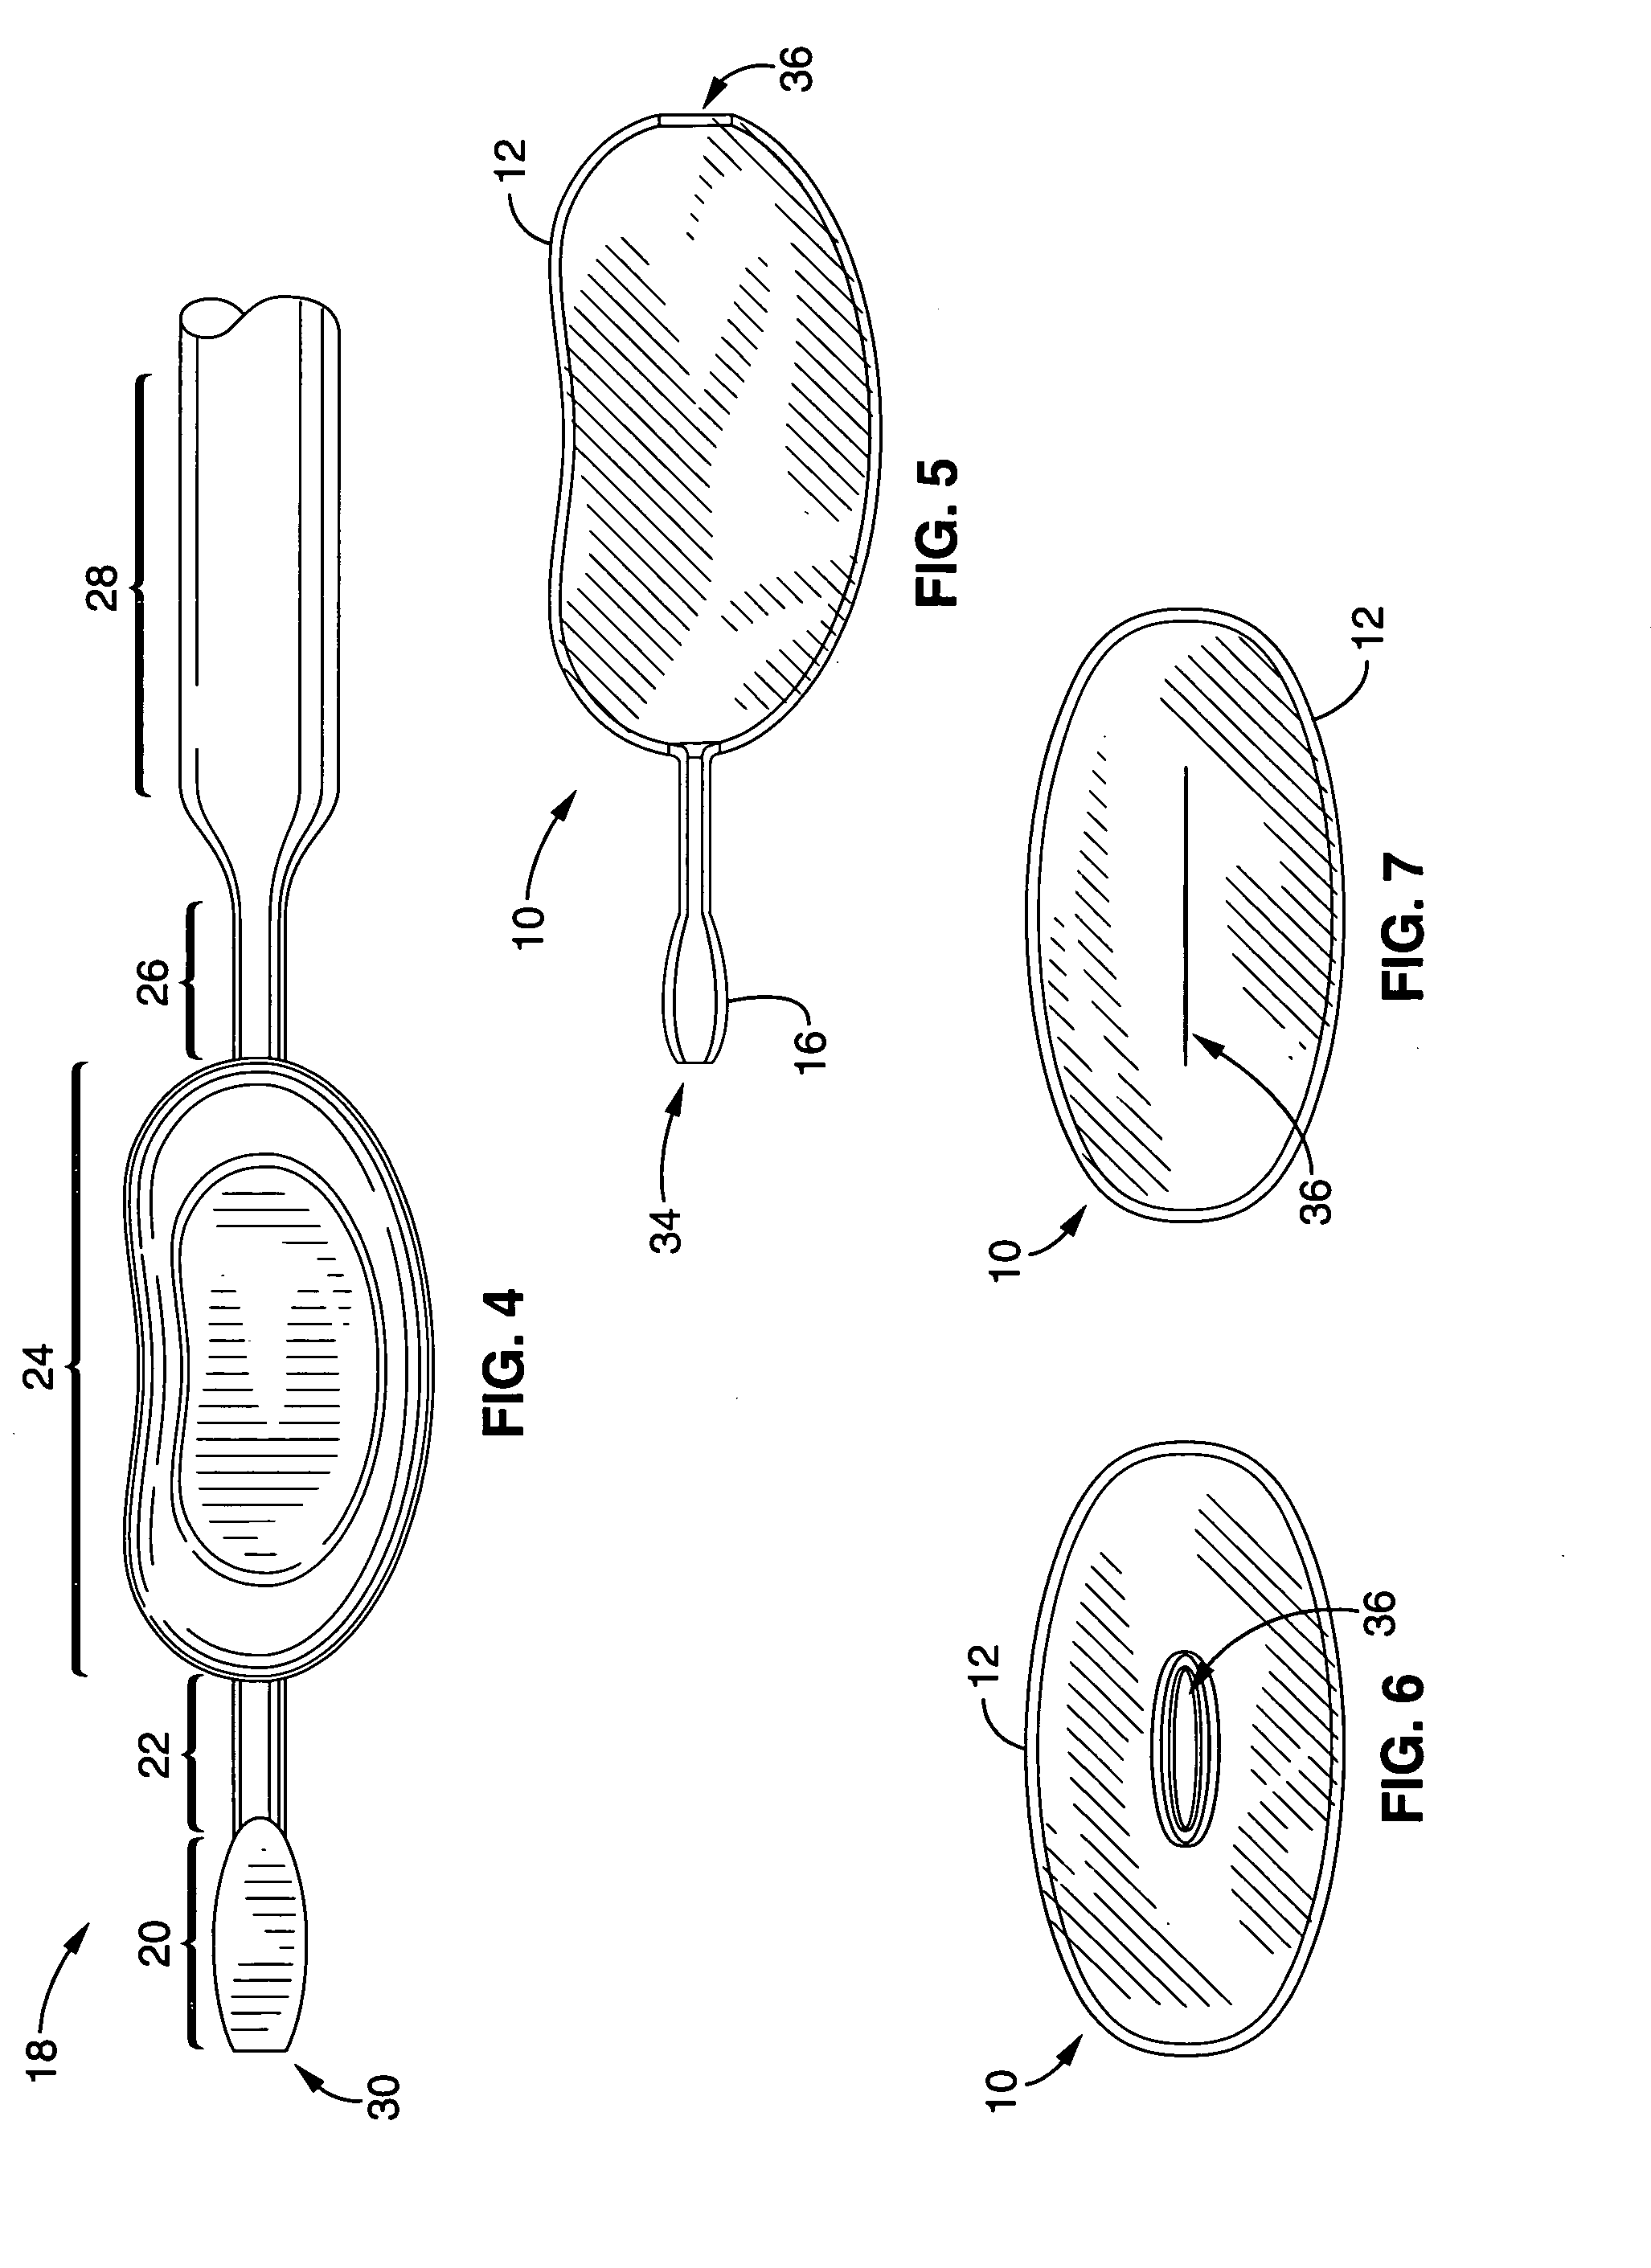 Systems, devices and methods for treatment of intervertebral disorders